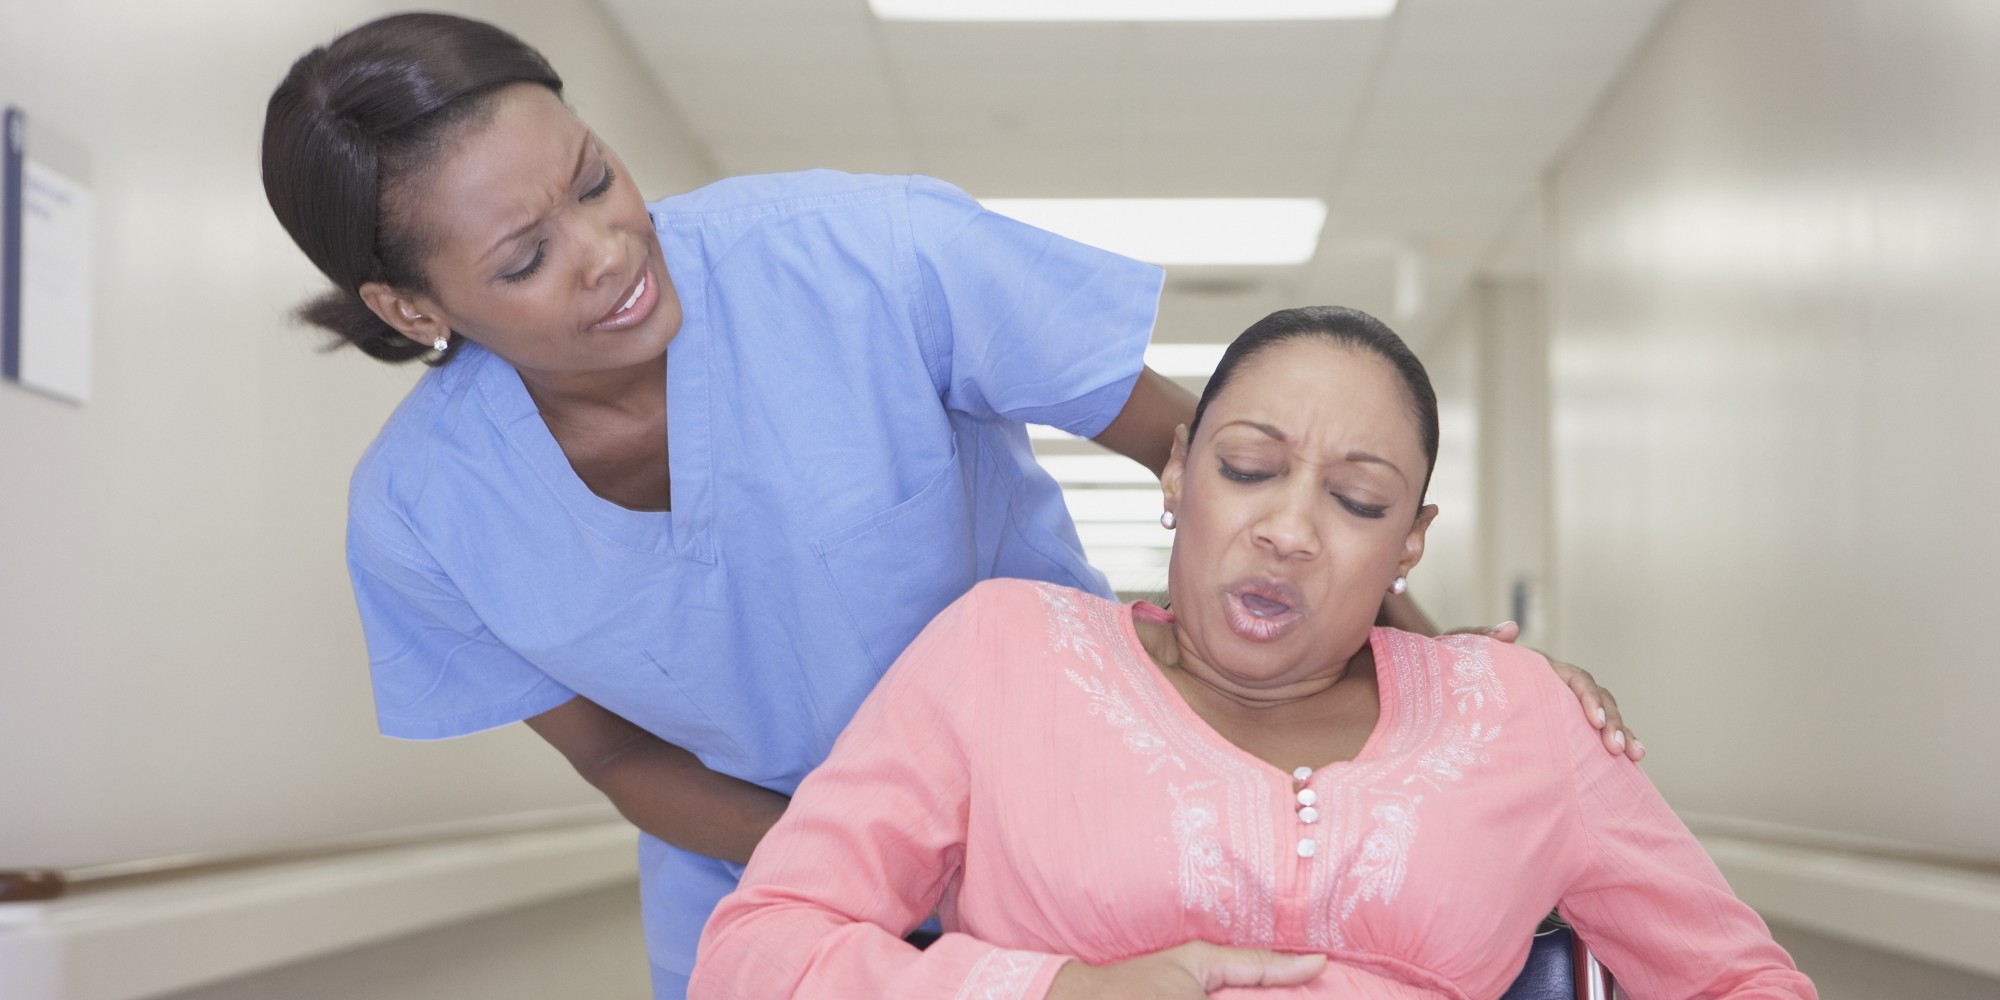 5 Myths About Labor and Delivery | HuffPost